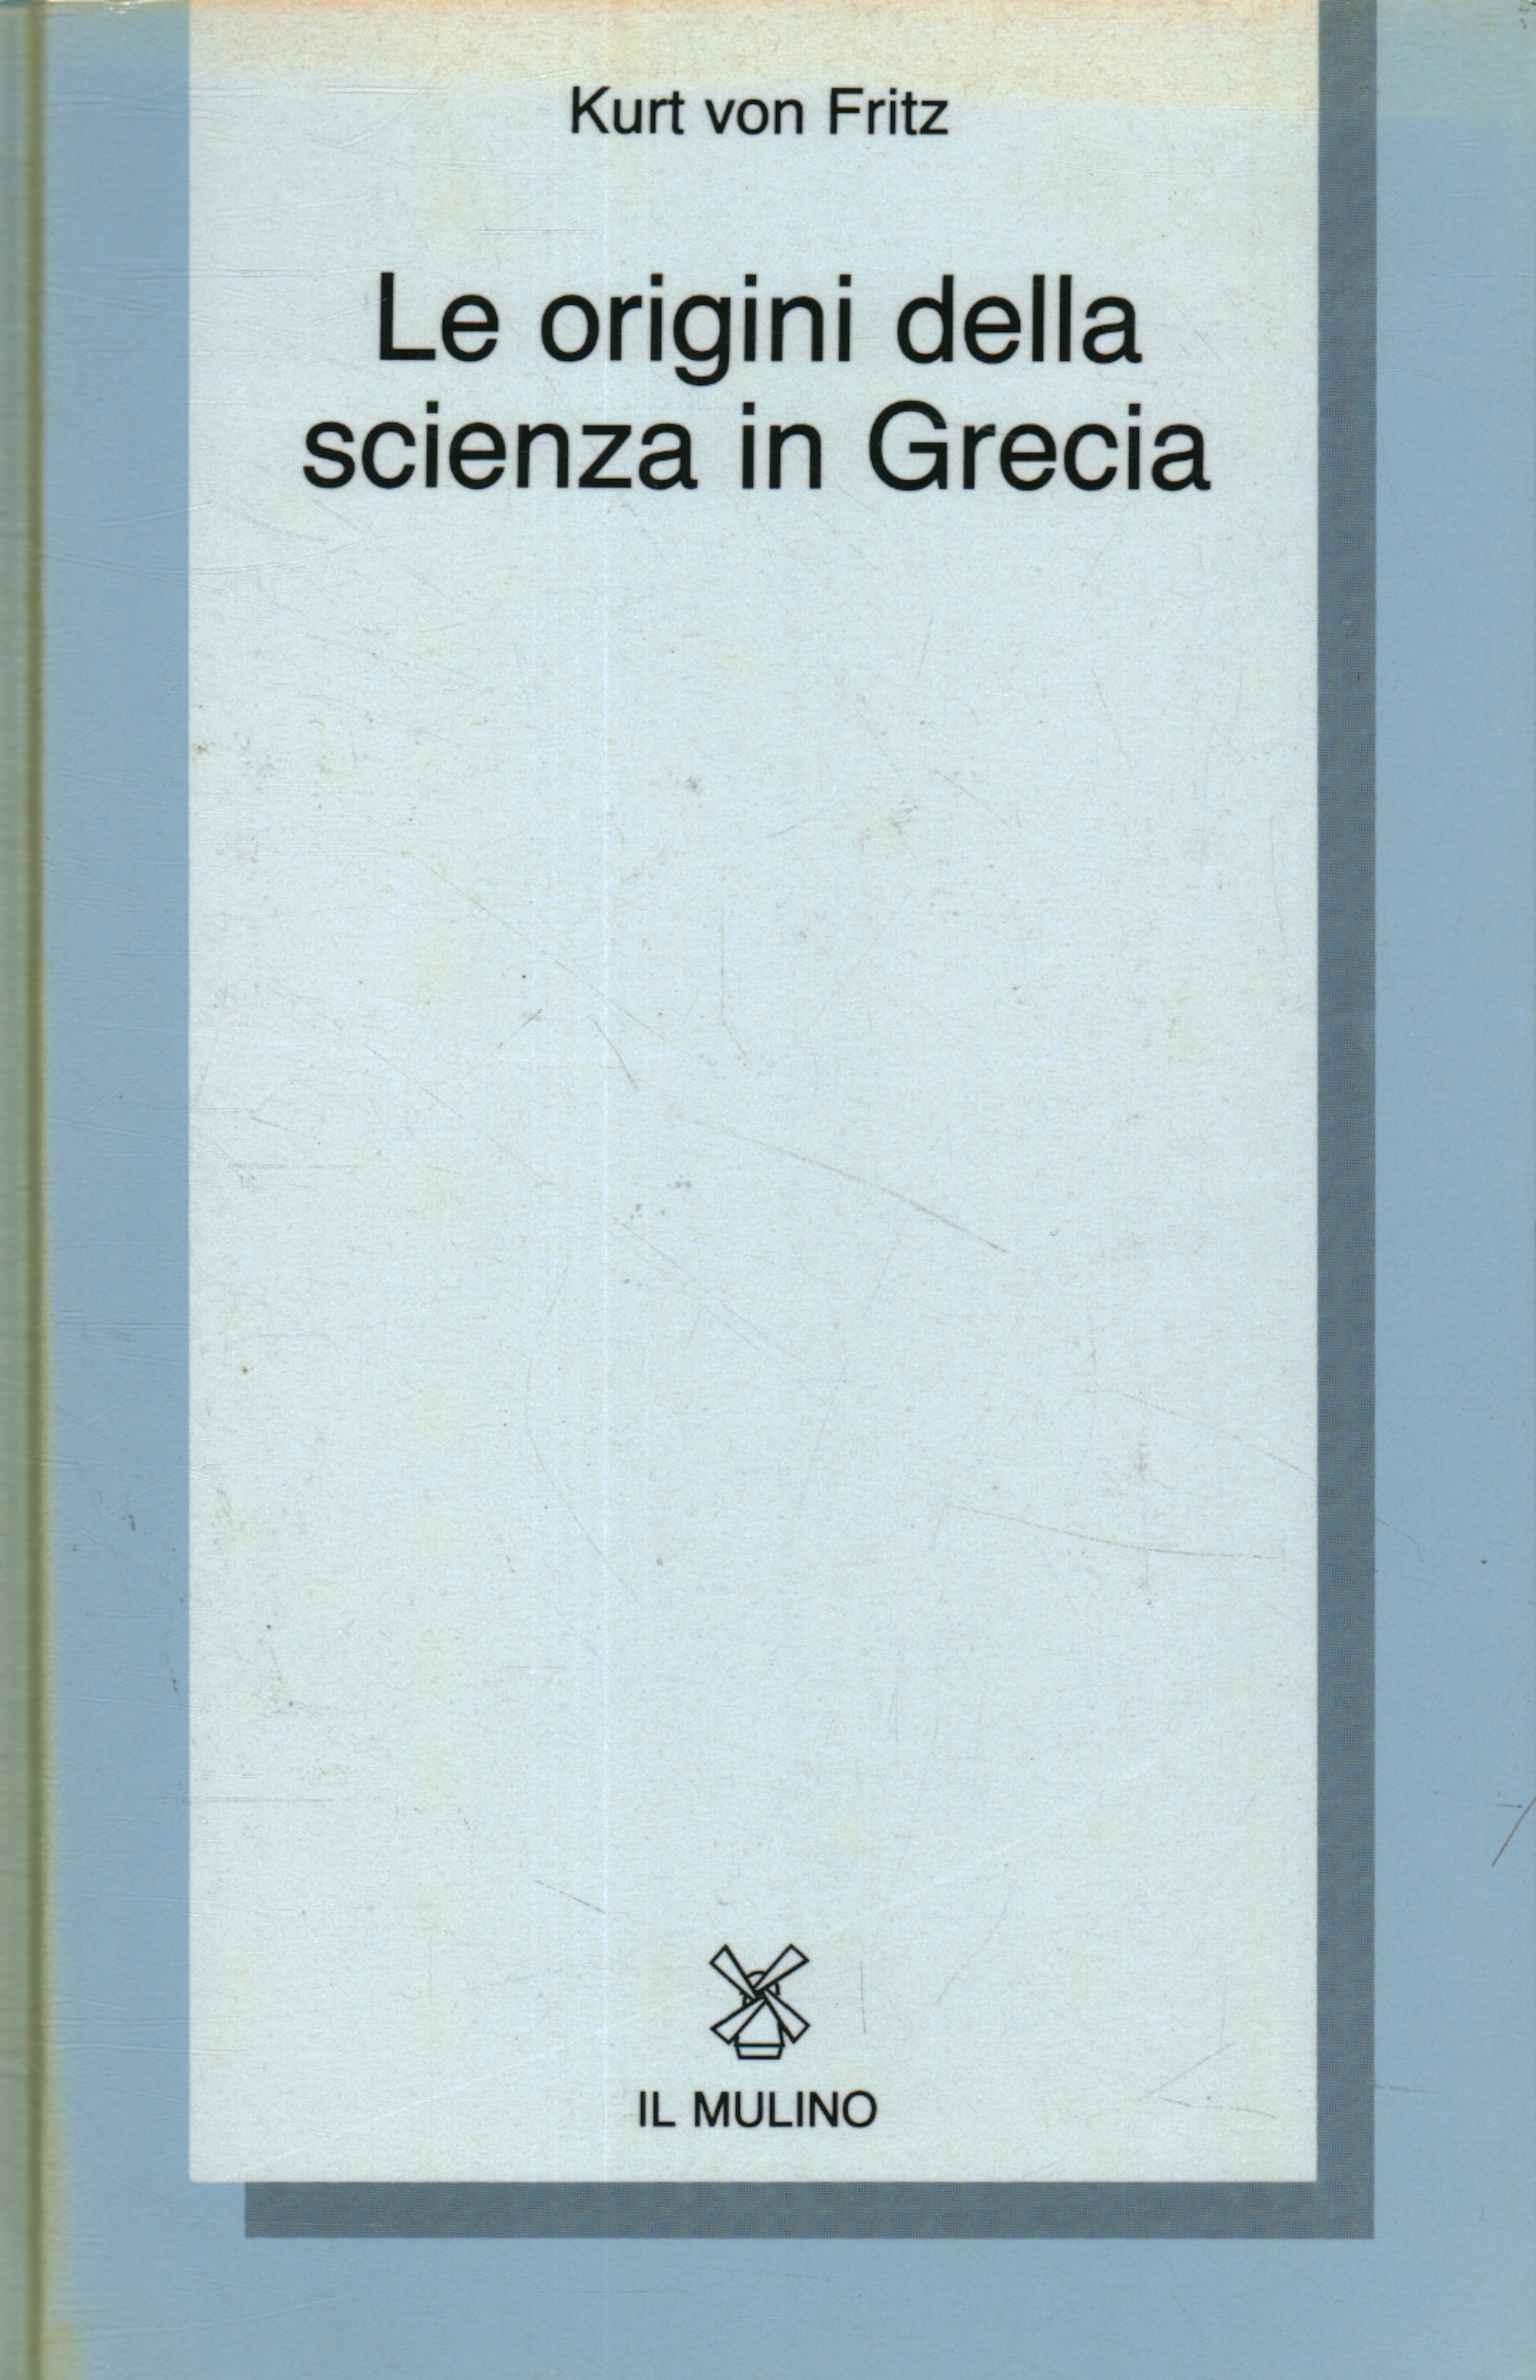 The origins of science in Greece